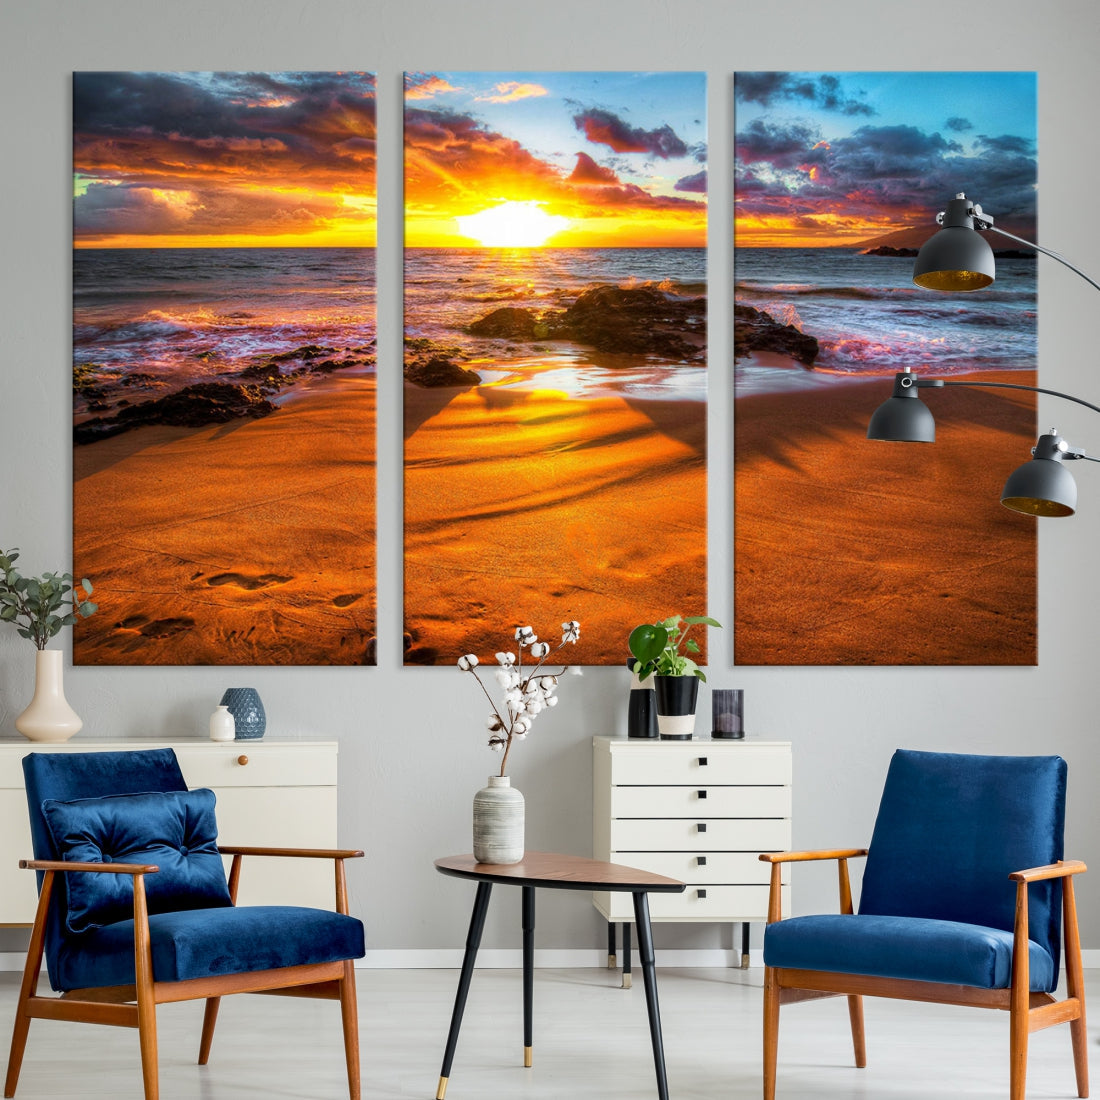 Thrilling Ocean Sunset from Beach Large Canvas Art Print for Wall Decor